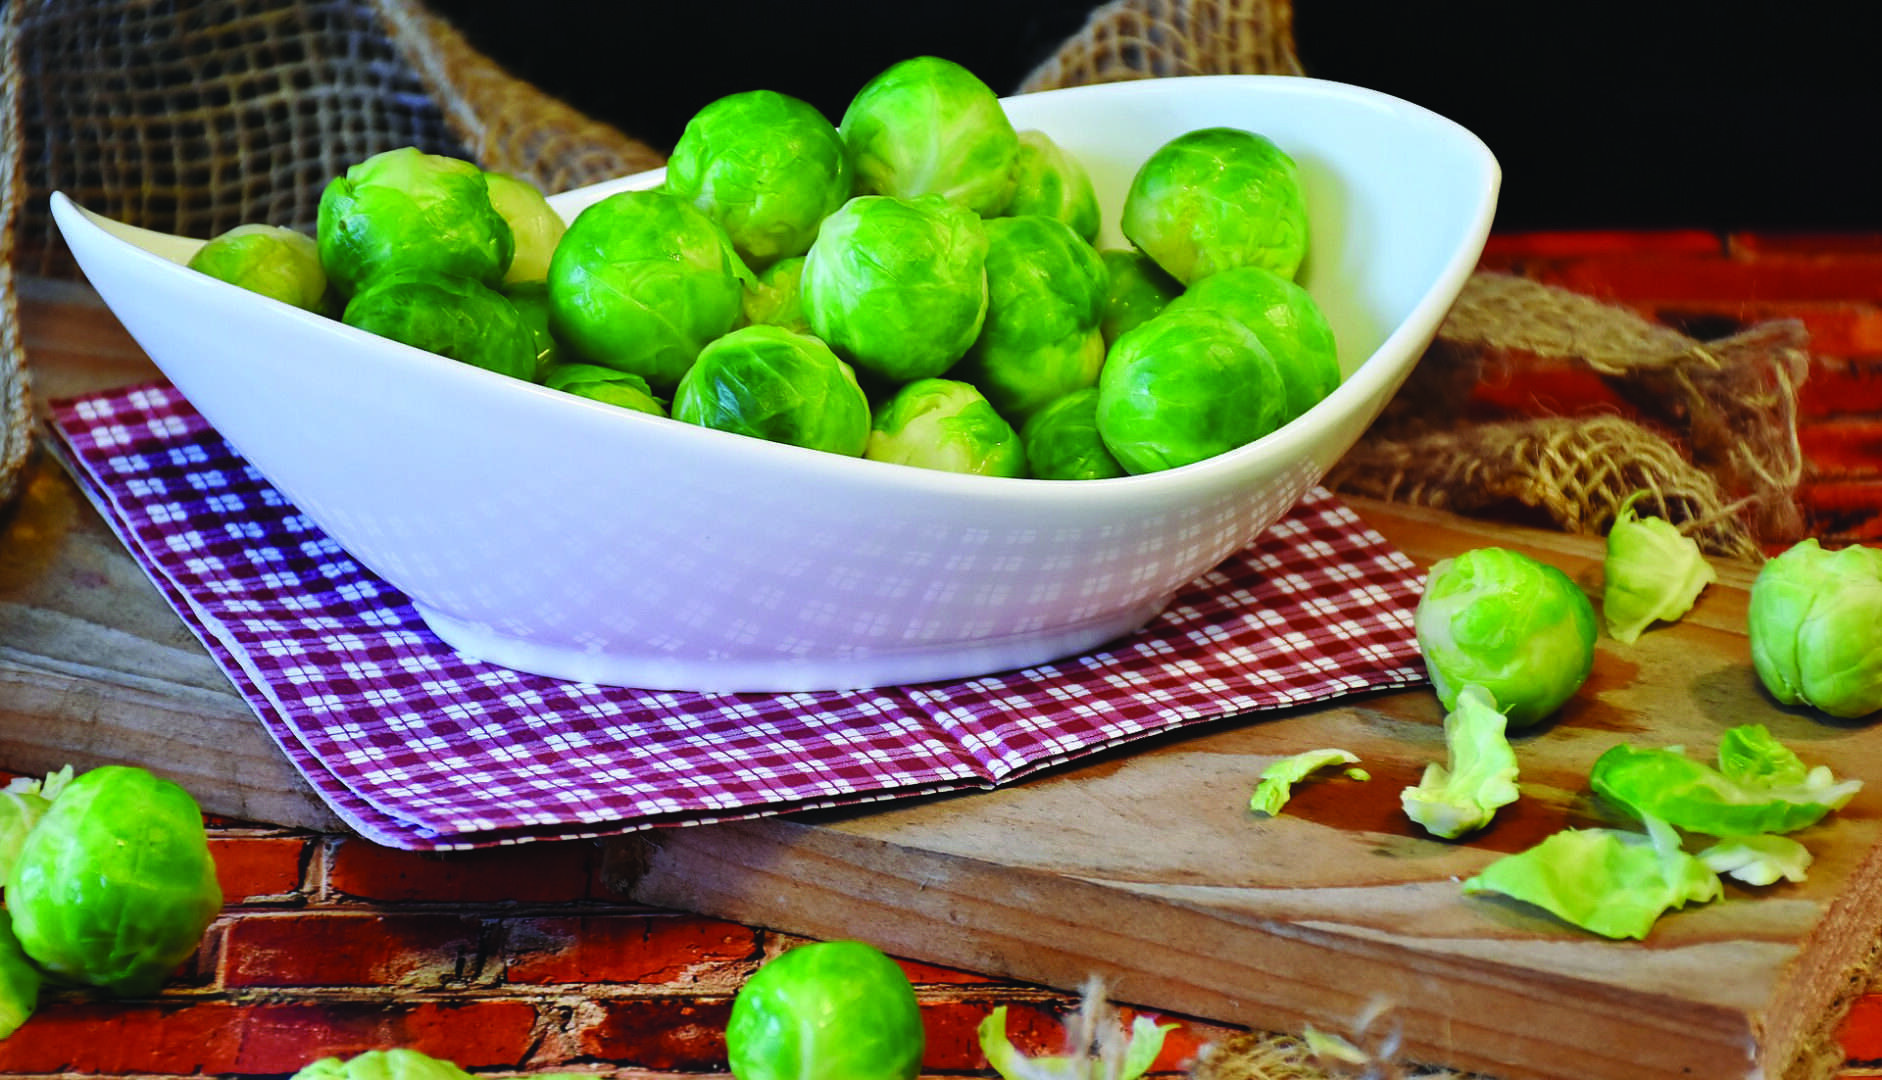 brussels sprouts 1856706 1920